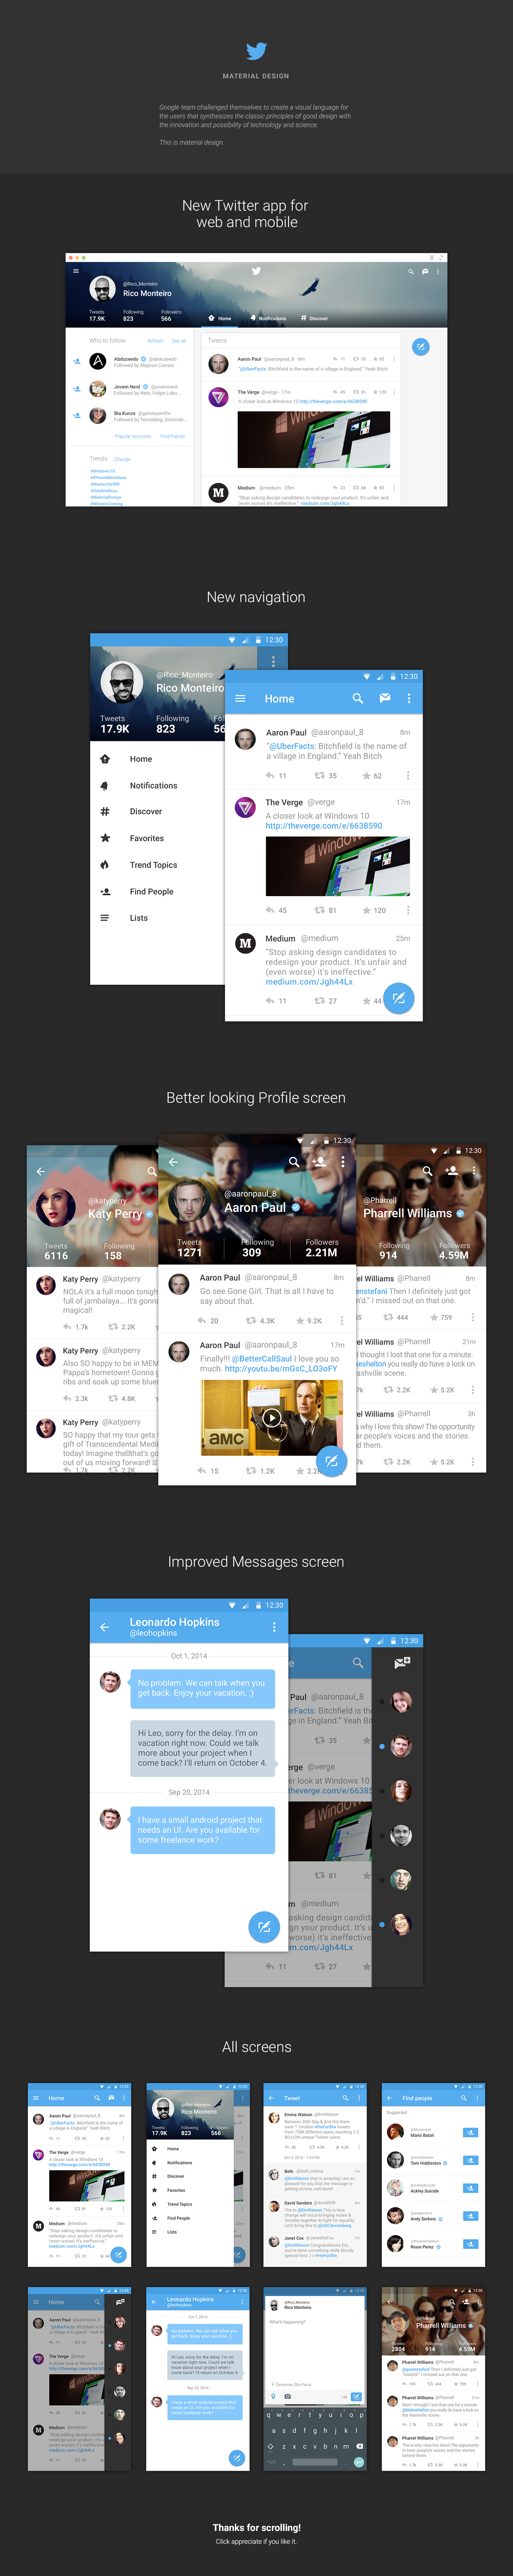 material design android l google android ios8 twitter tweetdeck app mobile UI ux applewatch lollipop android lollipop